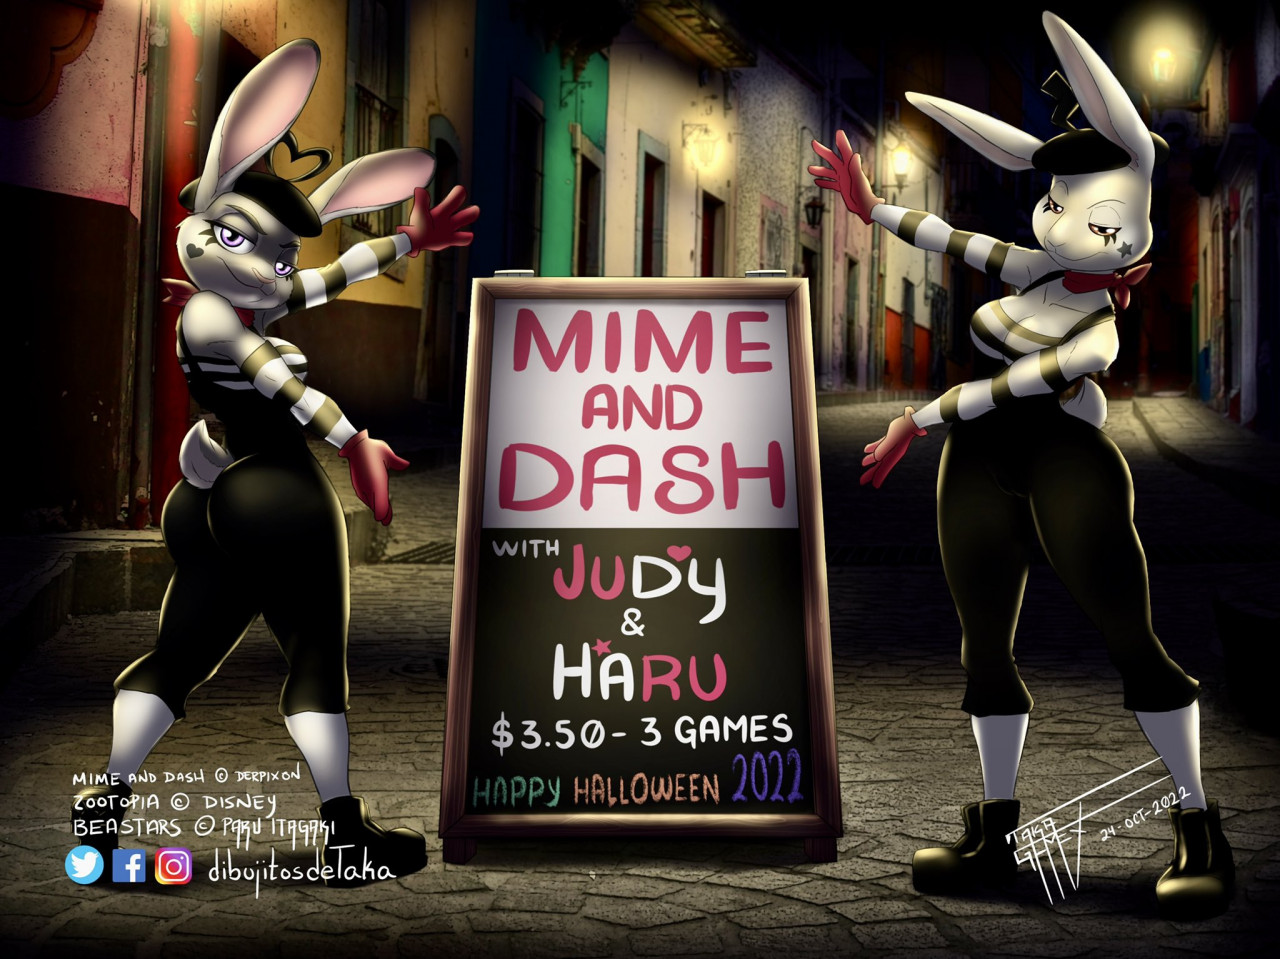 Mime.and.dash